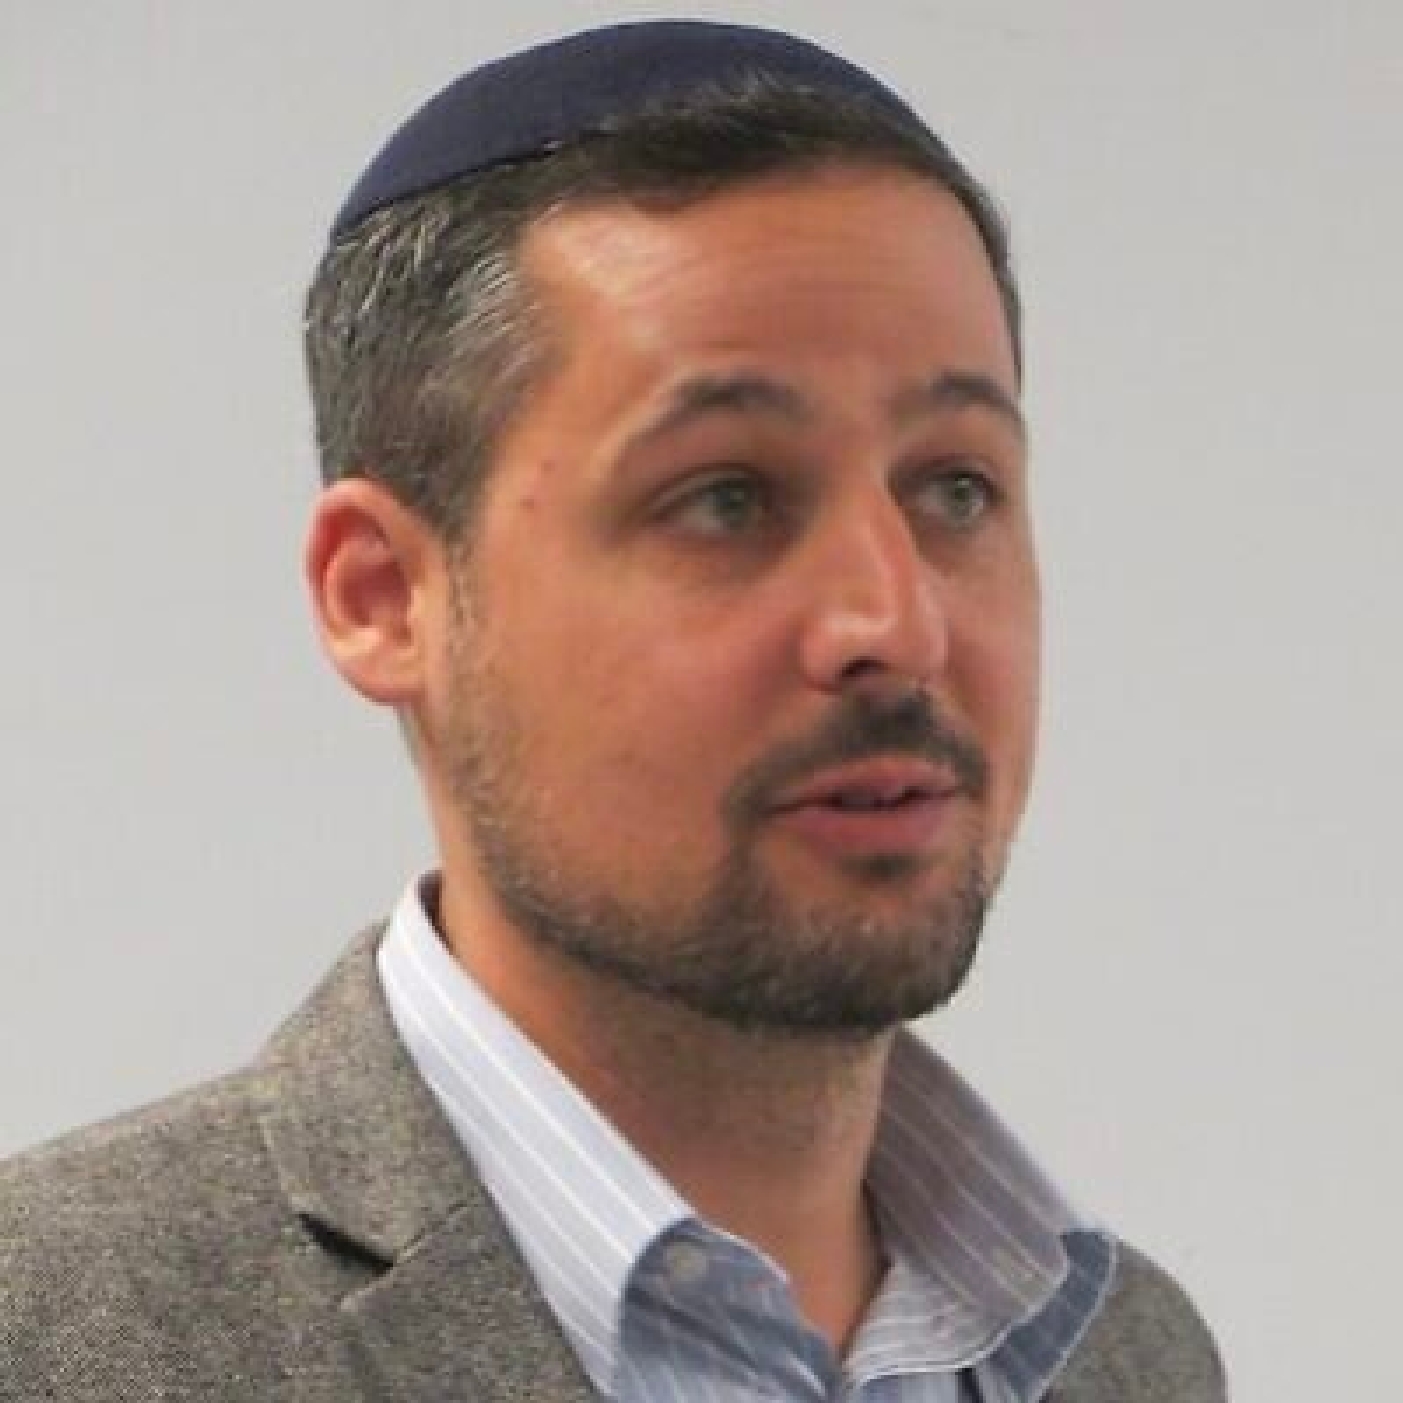 Alex Traiman, CEO and Jerusalem Bureau Chief of JNS, discusses the war in Israel